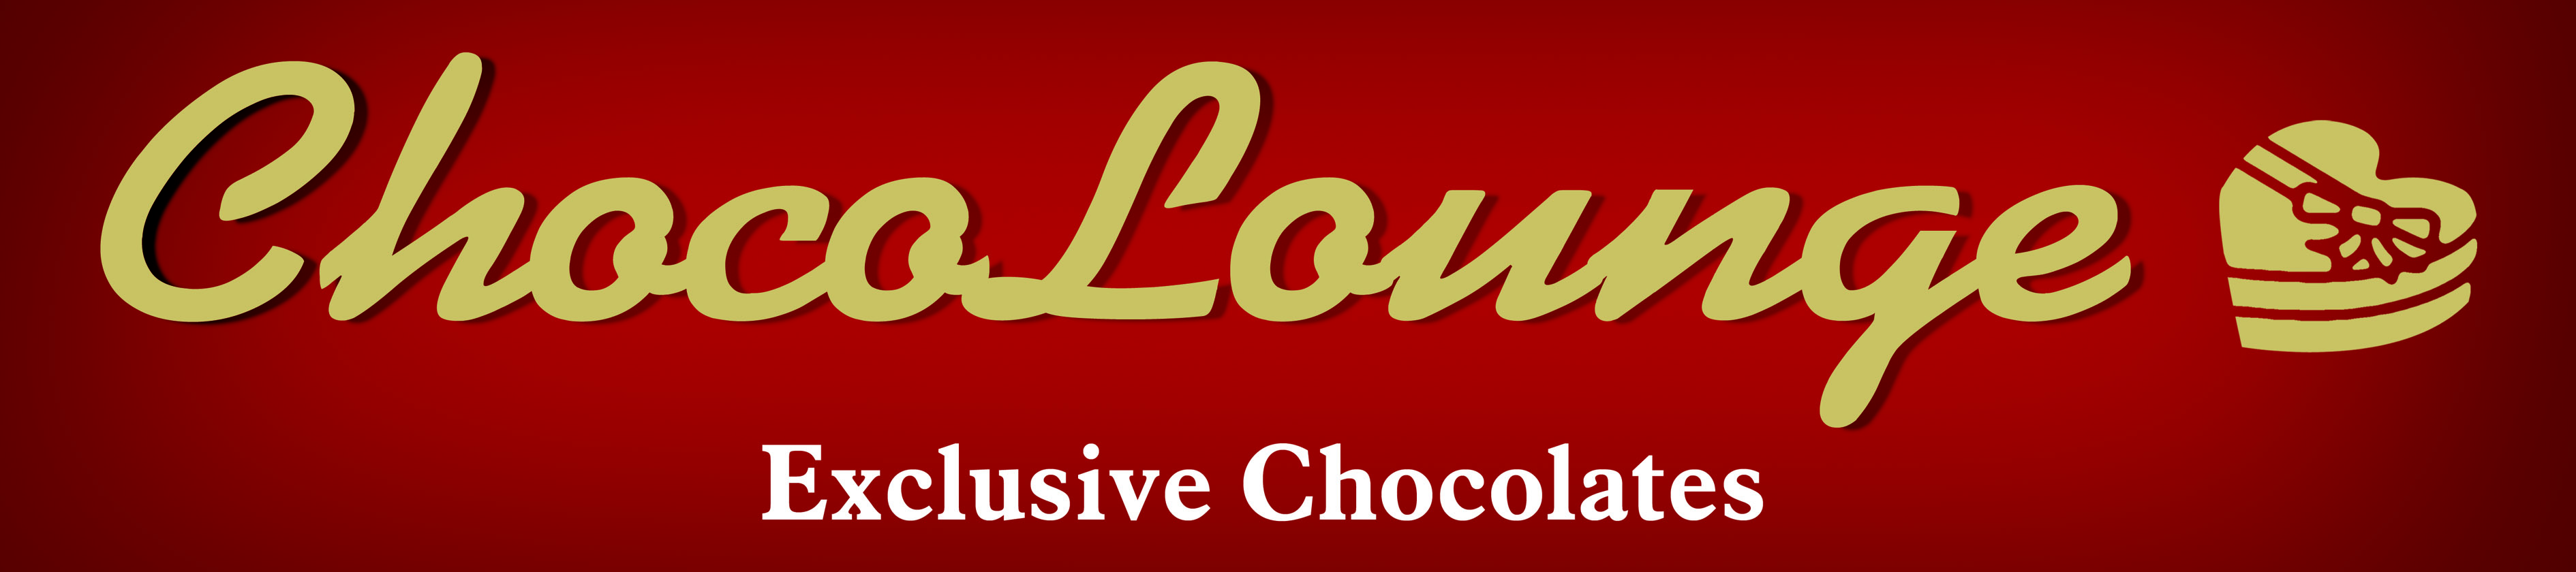 online imported chocolate shopping in india